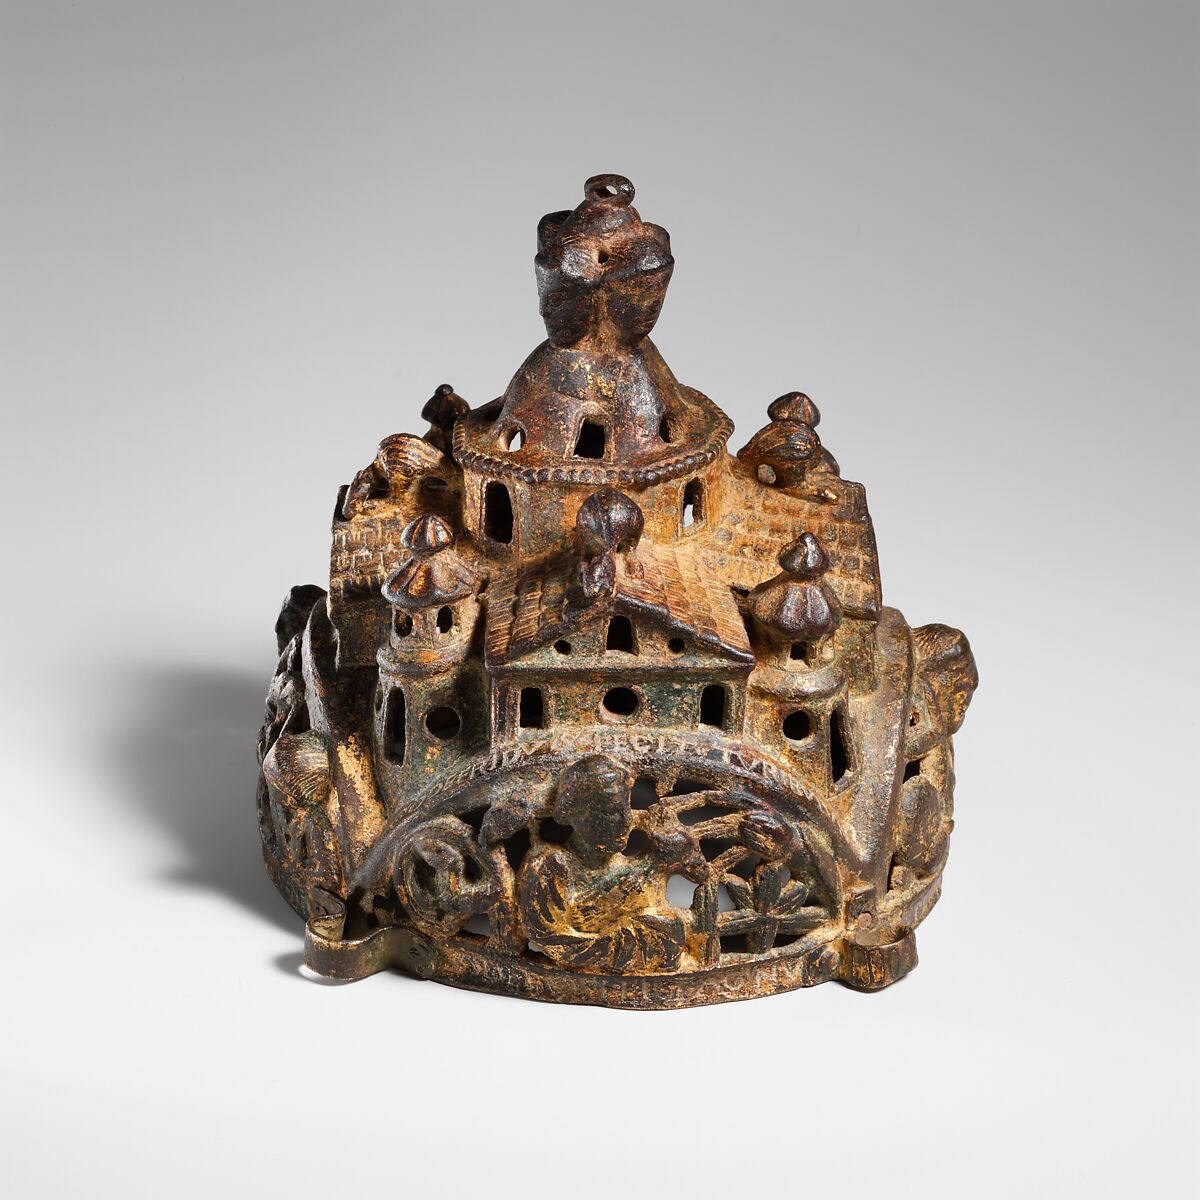 Cover of a Censer, Godefridus, Copper alloy, cast, engraved, chased, punched, and gilded, South Netherlandish